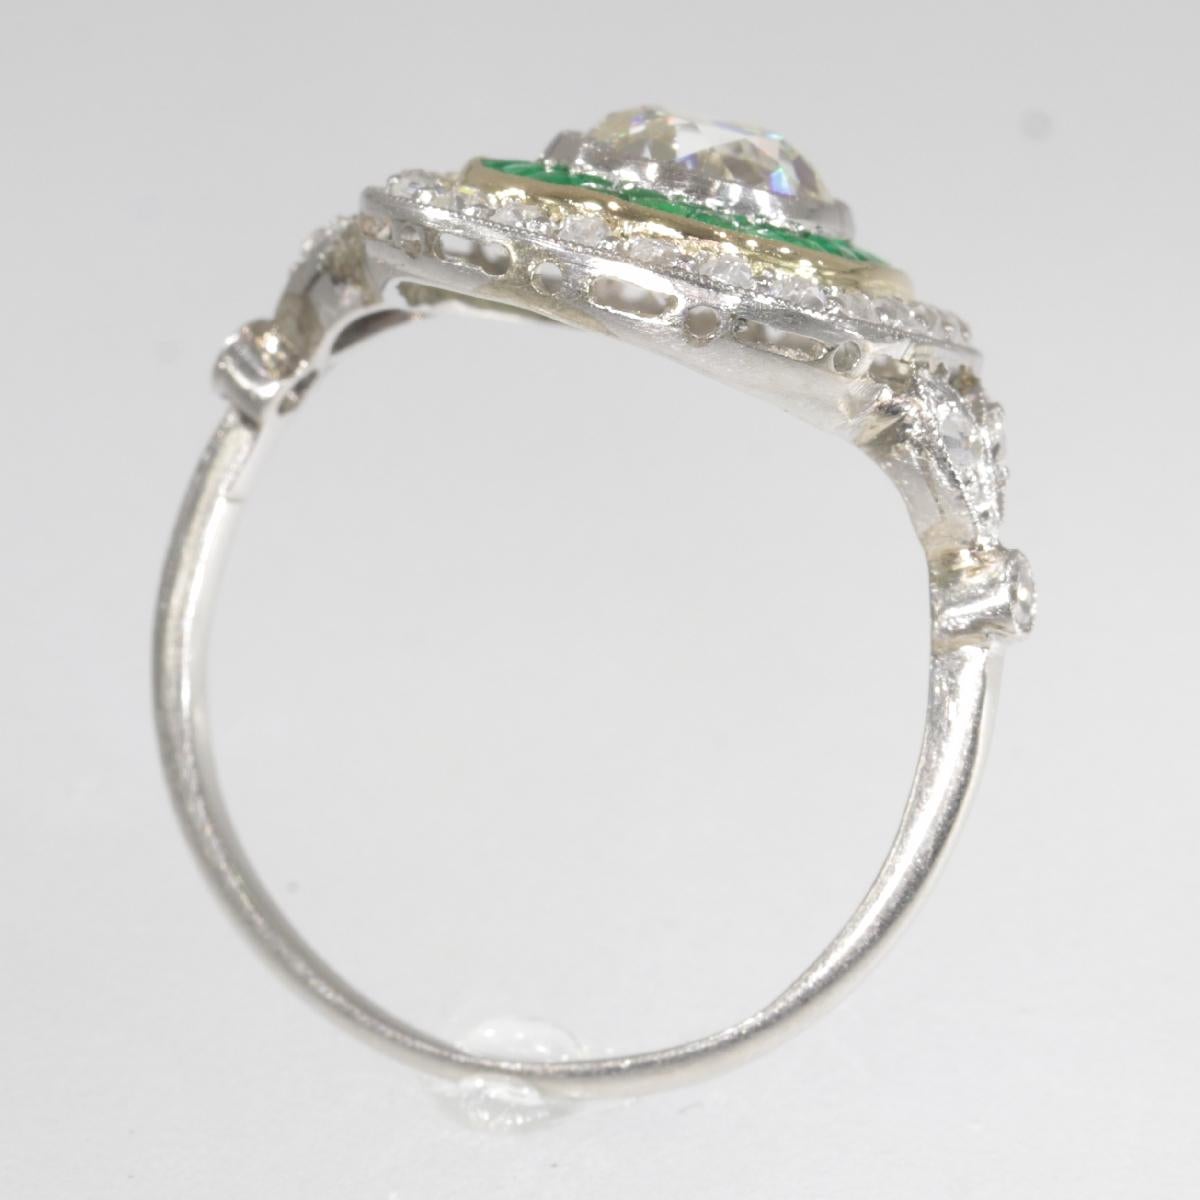 Stunning Vintage Art Deco Style Large Diamond and Emerald Engagement Ring, 1930s For Sale 2